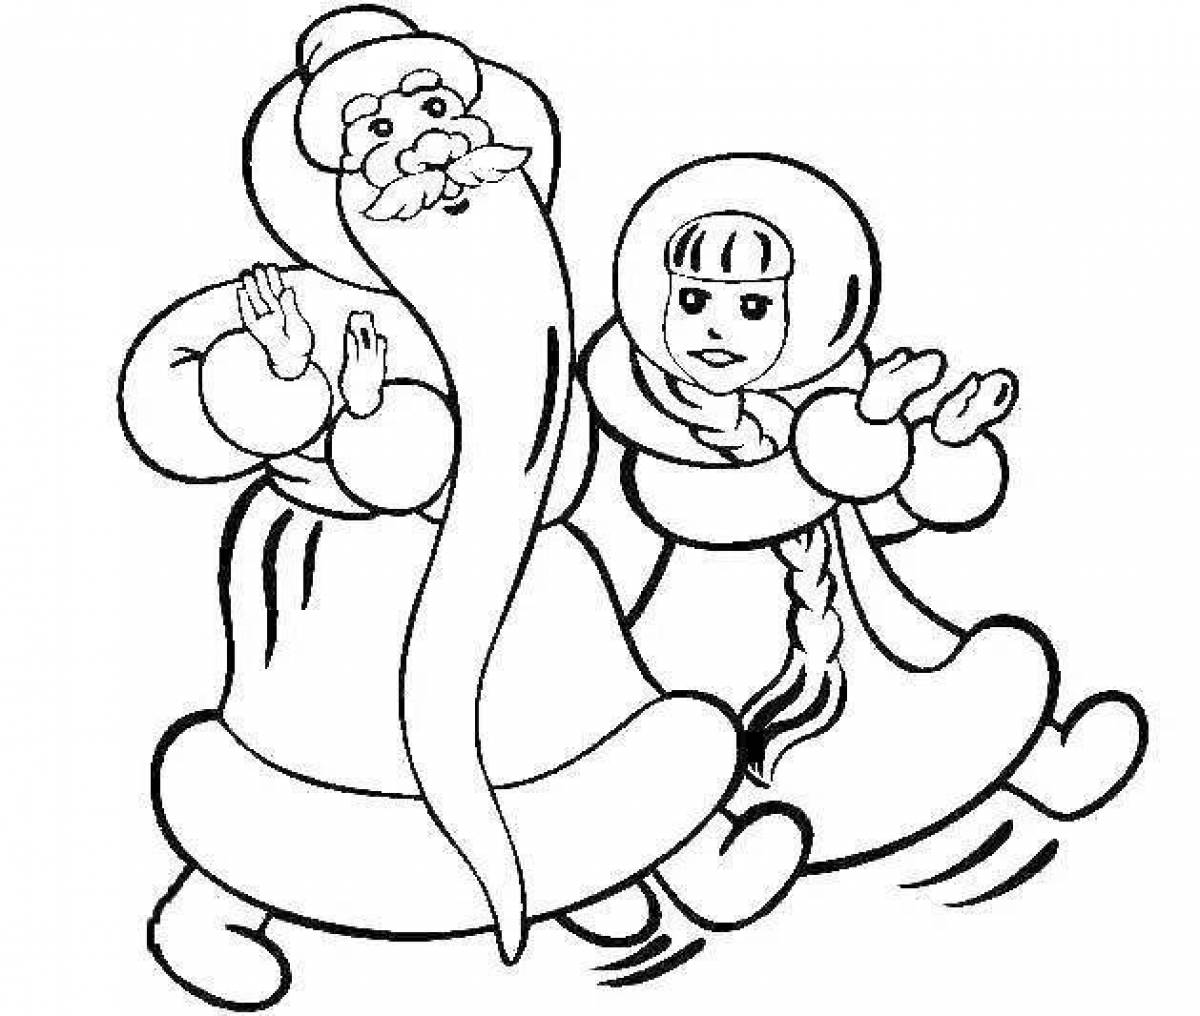 Merry Christmas coloring pages Santa Claus and Snow Maiden